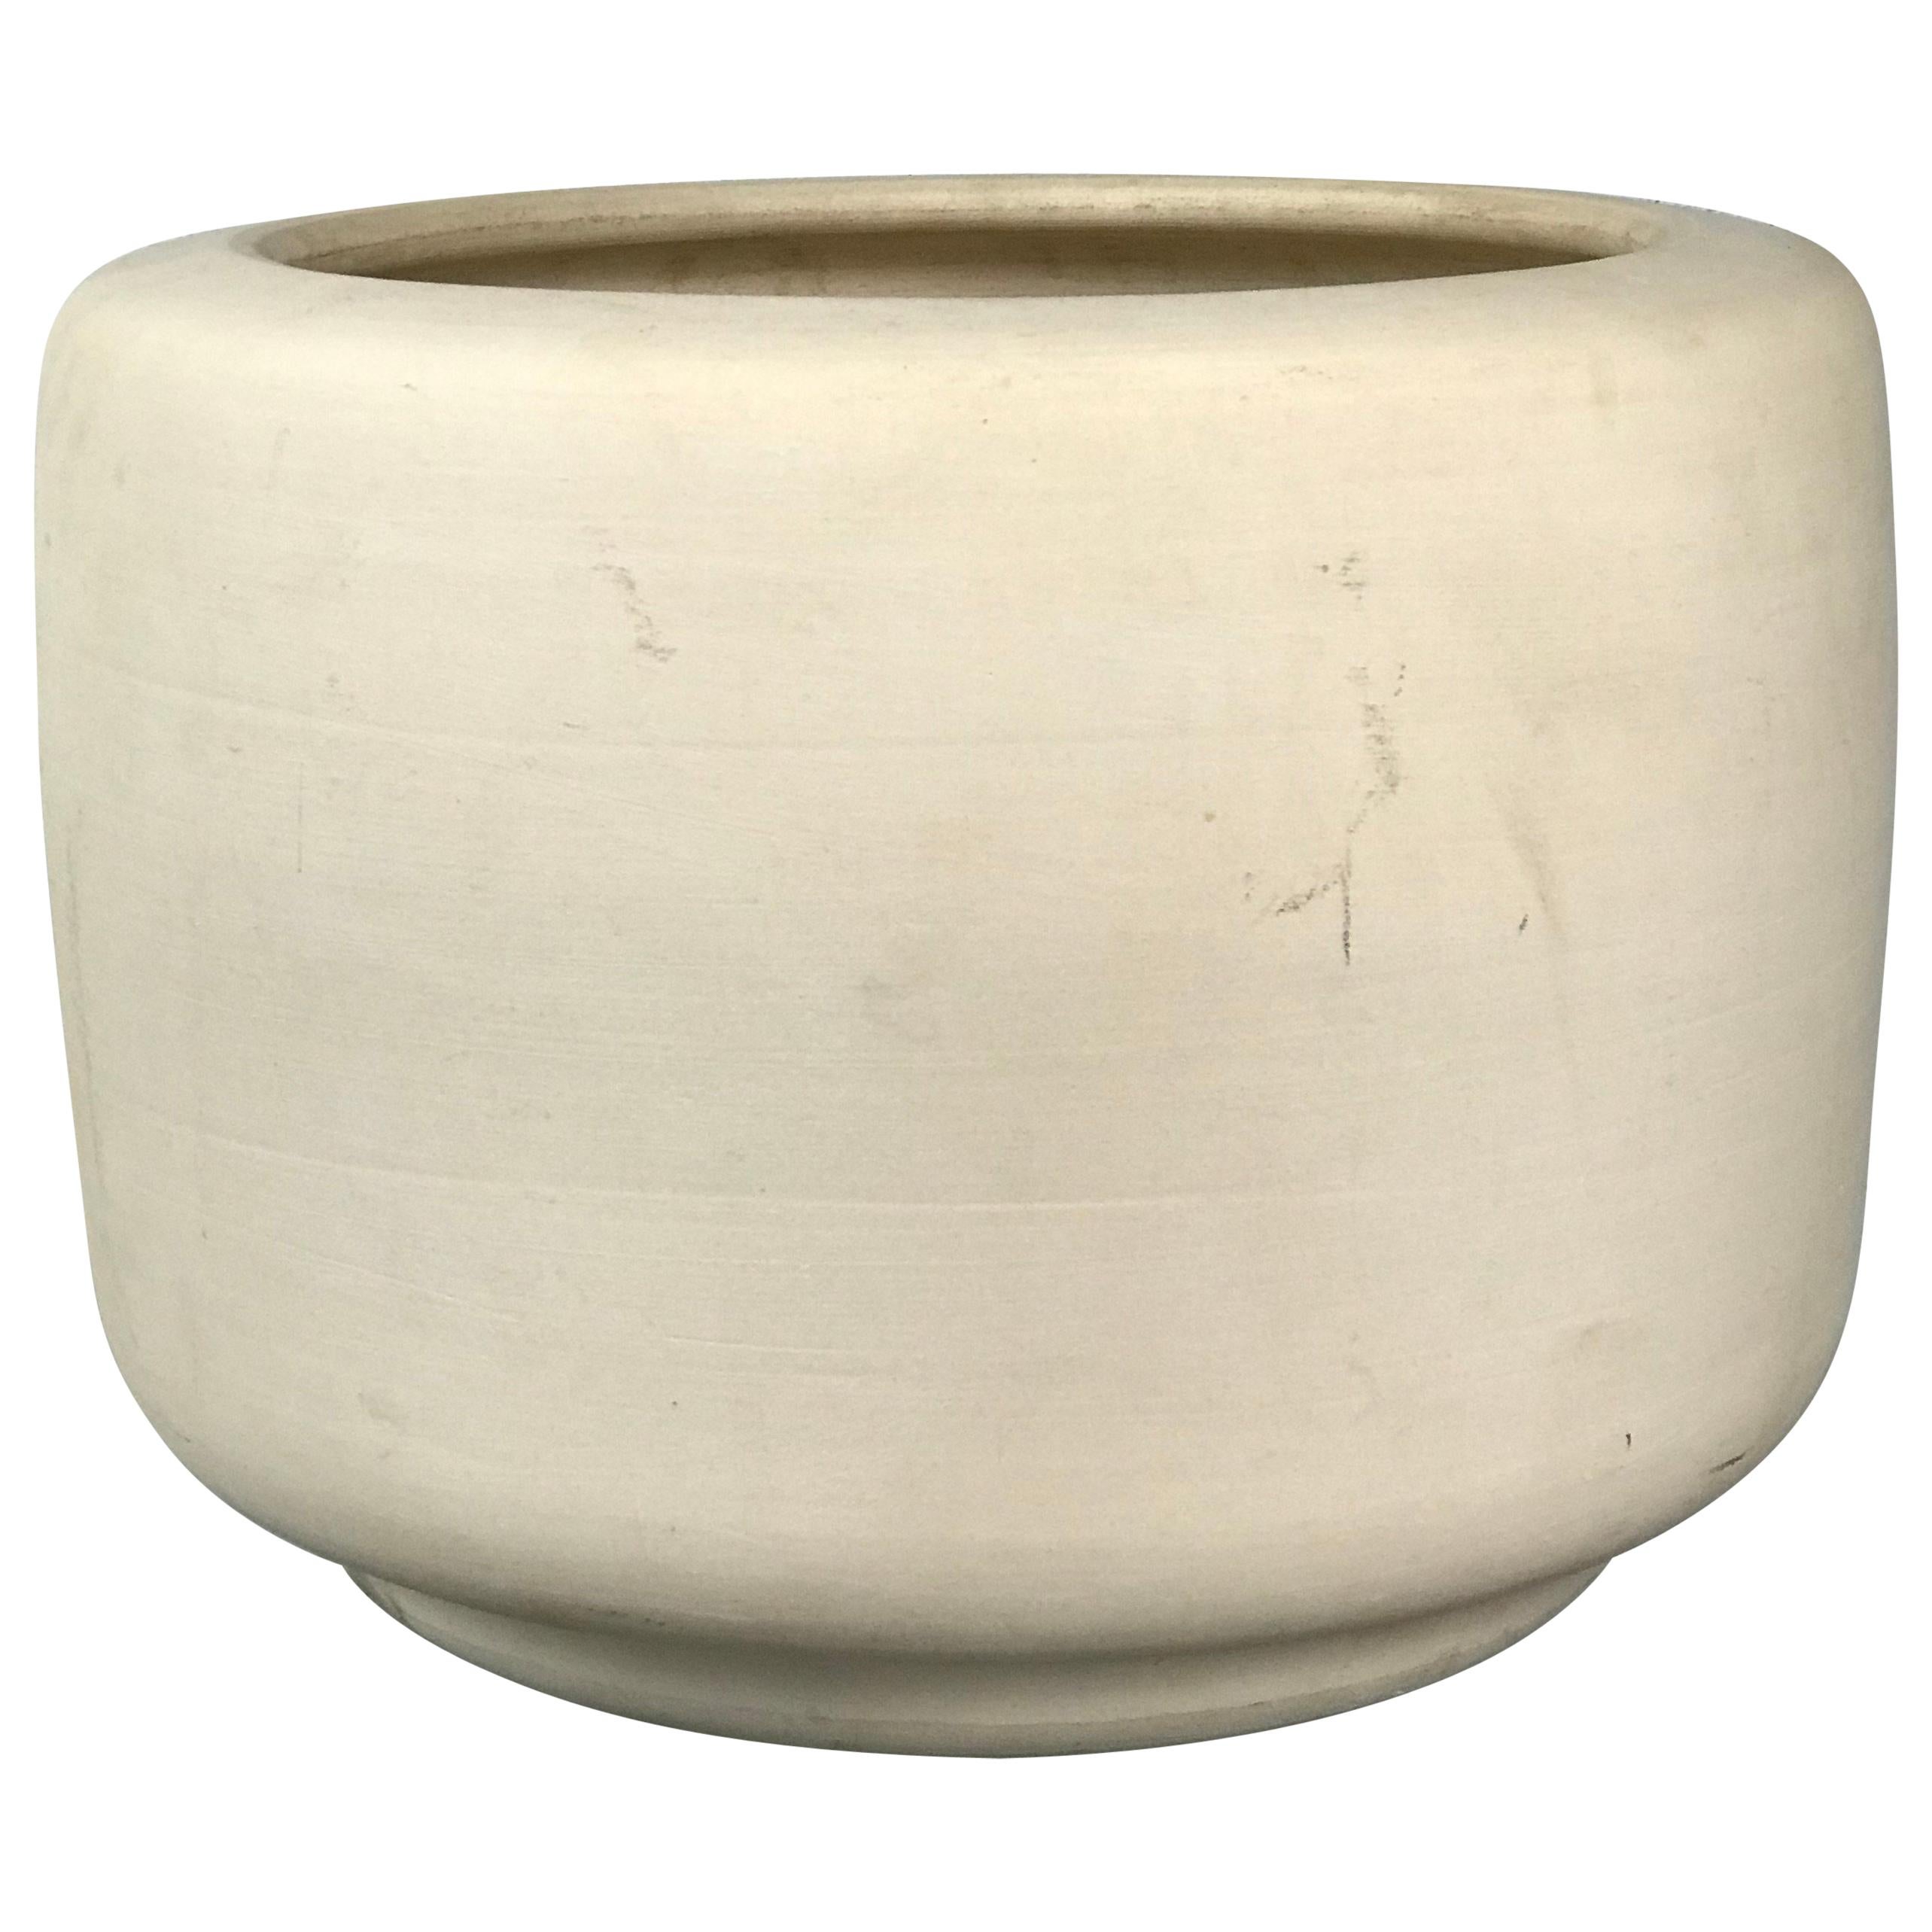 Architectural Pottery "Tire" Planter in Bisque by John Follis & Rex Goode